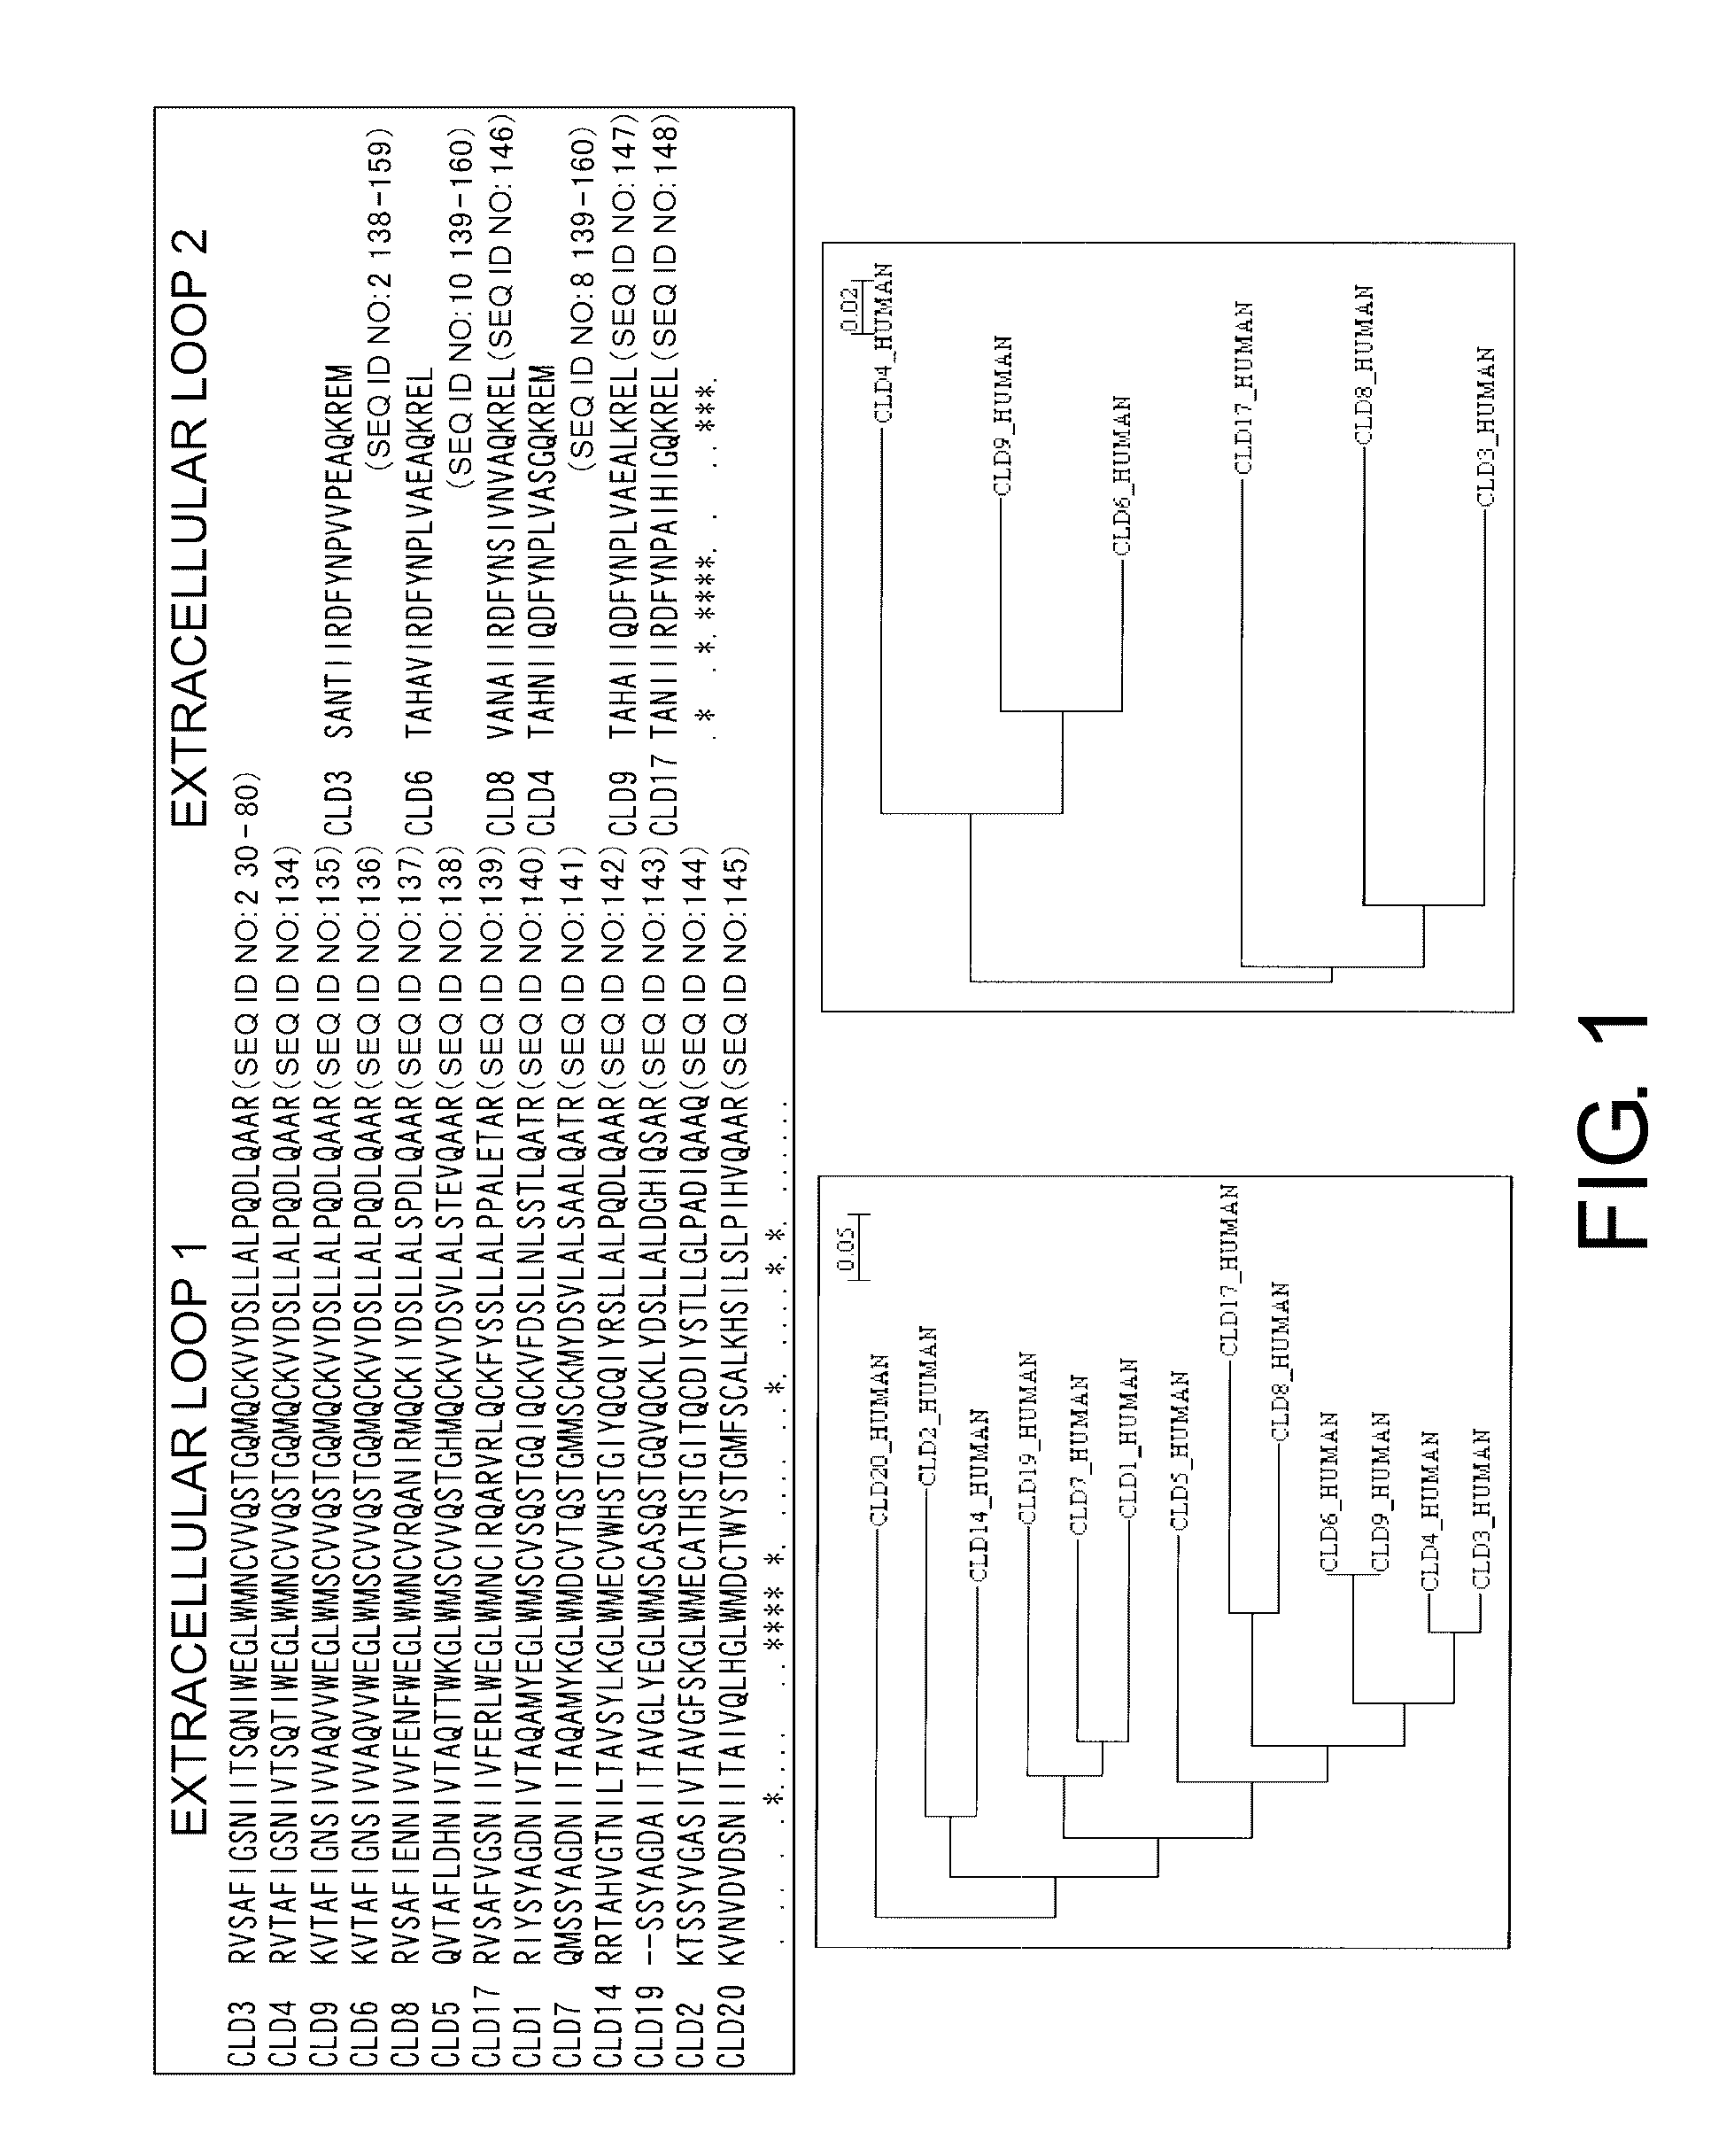 Anti-Claudin 3 Monoclonal Antibody and Treatment and Diagnosis of Cancer Using the Same